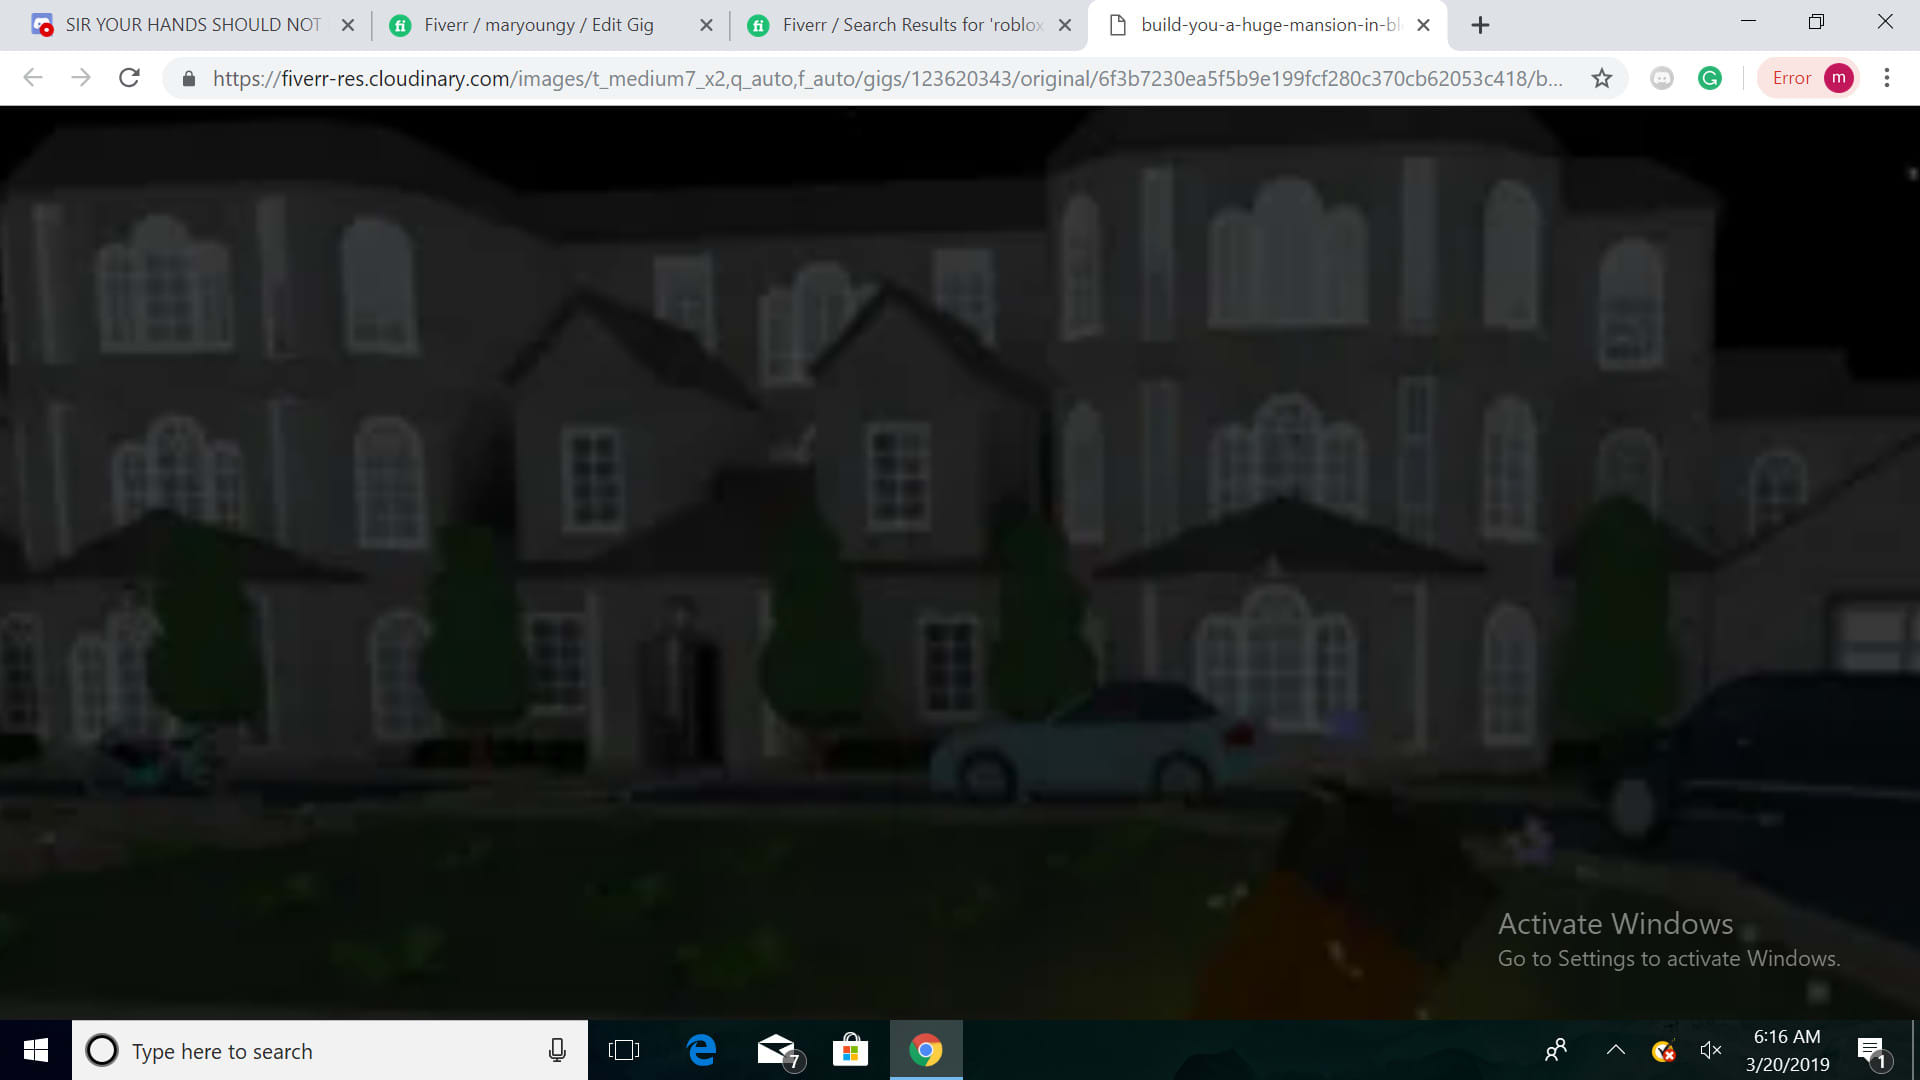 Bloxburg Mansion And Family Houses And Roleplay Houses By Maryoungy Fiverr Roblox bloxburg rollinghills contemporary mansion. bloxburg mansion and family houses and roleplay houses